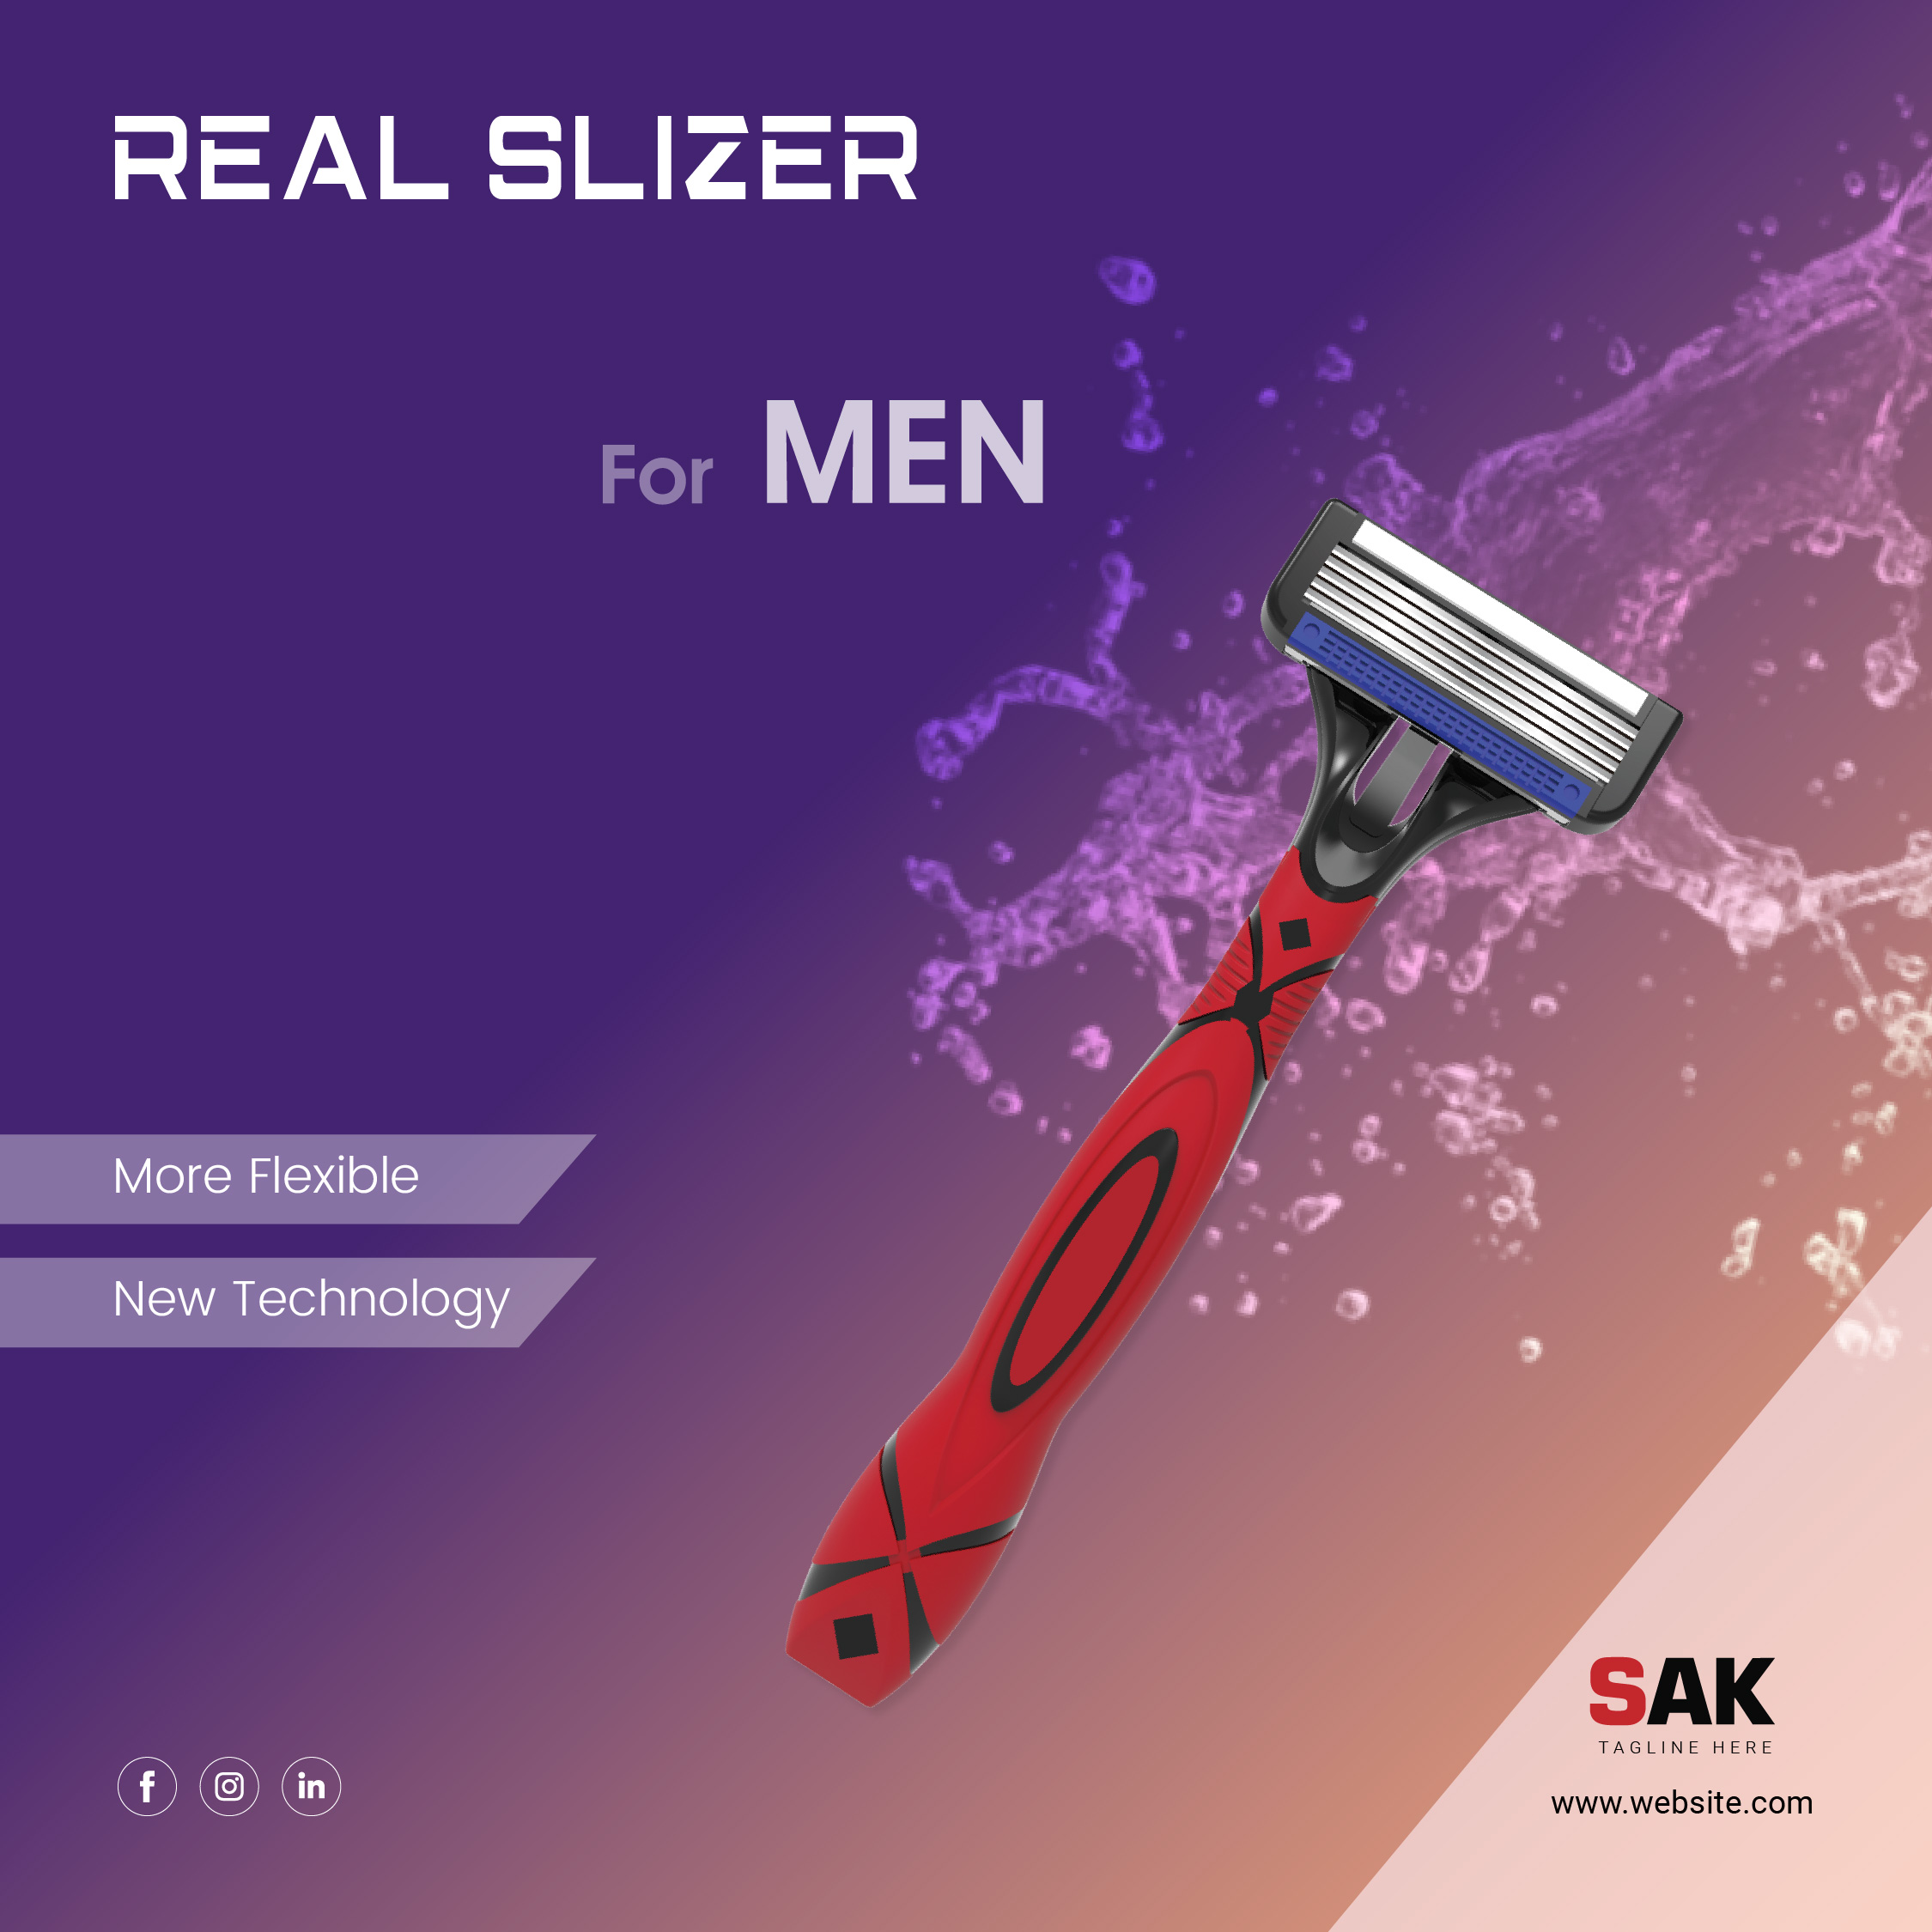 Razor for men with a red handle.